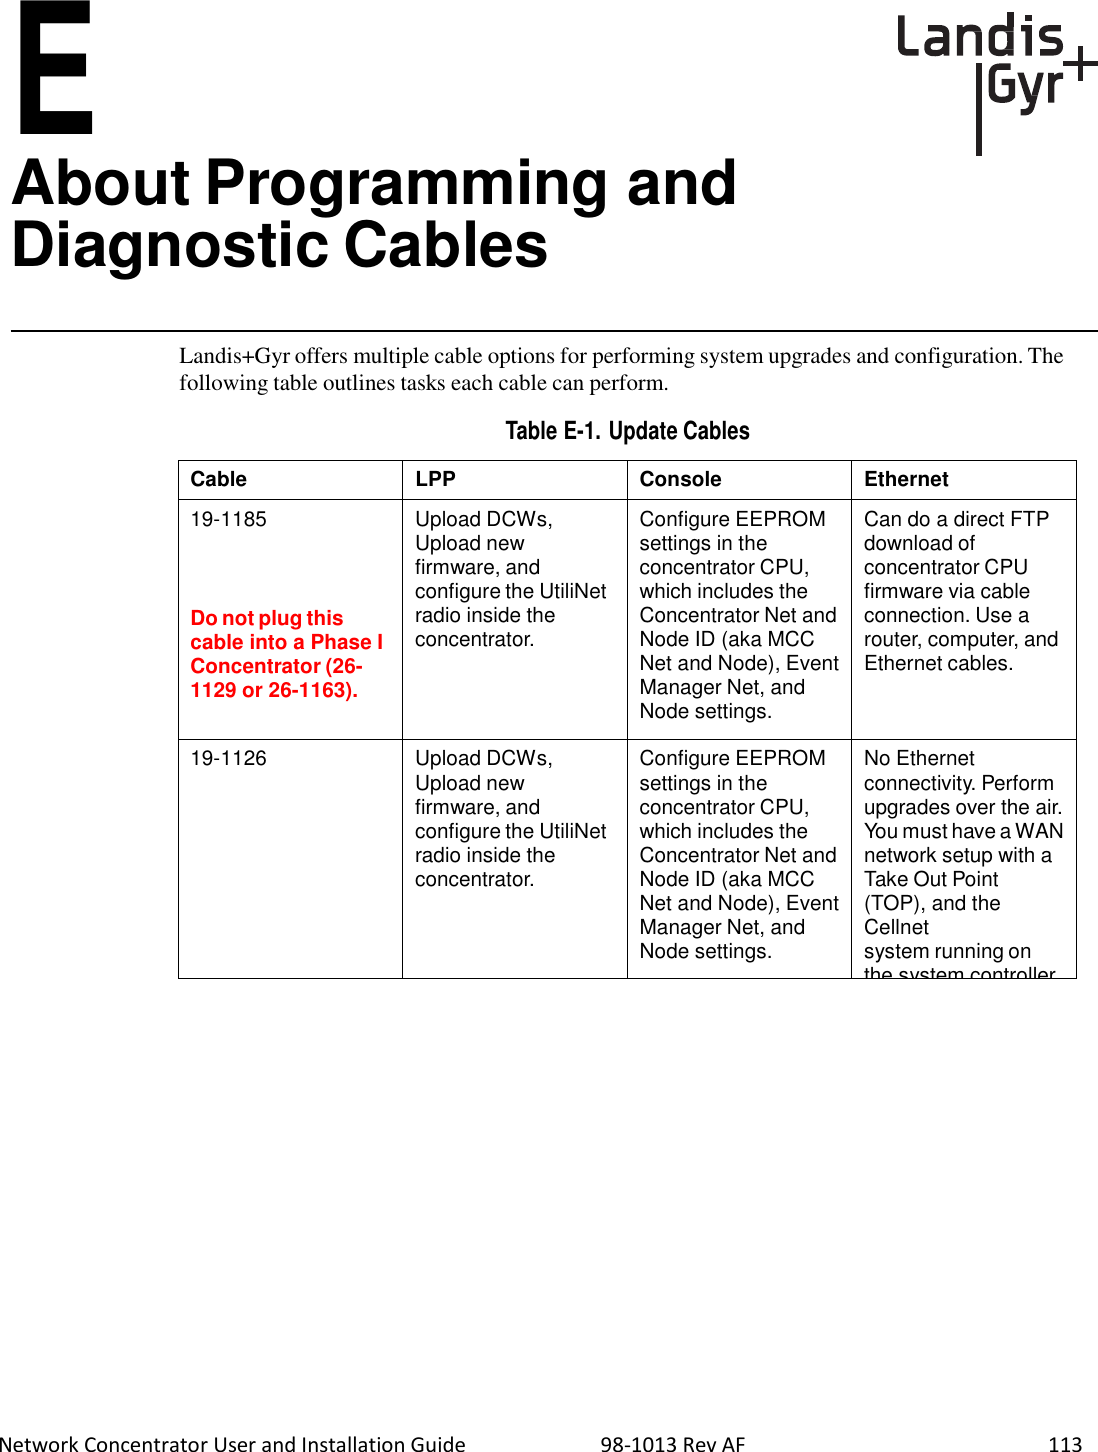 E About Programming and Diagnostic Cables  Network Concentrator User and Installation Guide                          98-1013 Rev AF    113   Landis+Gyr offers multiple cable options for performing system upgrades and configuration. The following table outlines tasks each cable can perform.  Table E-1. Update Cables  Cable LPP Console Ethernet 19-1185     Do not plug this cable into a Phase I Concentrator (26- 1129 or 26-1163). Upload DCWs, Upload new firmware, and configure the UtiliNet radio inside the concentrator. Configure EEPROM settings in the concentrator CPU, which includes the Concentrator Net and Node ID (aka MCC Net and Node), Event Manager Net, and Node settings. Can do a direct FTP download of concentrator CPU firmware via cable connection. Use a router, computer, and Ethernet cables. 19-1126 Upload DCWs, Upload new firmware, and configure the UtiliNet radio inside the concentrator. Configure EEPROM settings in the concentrator CPU, which includes the Concentrator Net and Node ID (aka MCC Net and Node), Event Manager Net, and Node settings. No Ethernet connectivity. Perform upgrades over the air. You must have a WAN network setup with a Take Out Point (TOP), and the Cellnet system running on the system controller. 